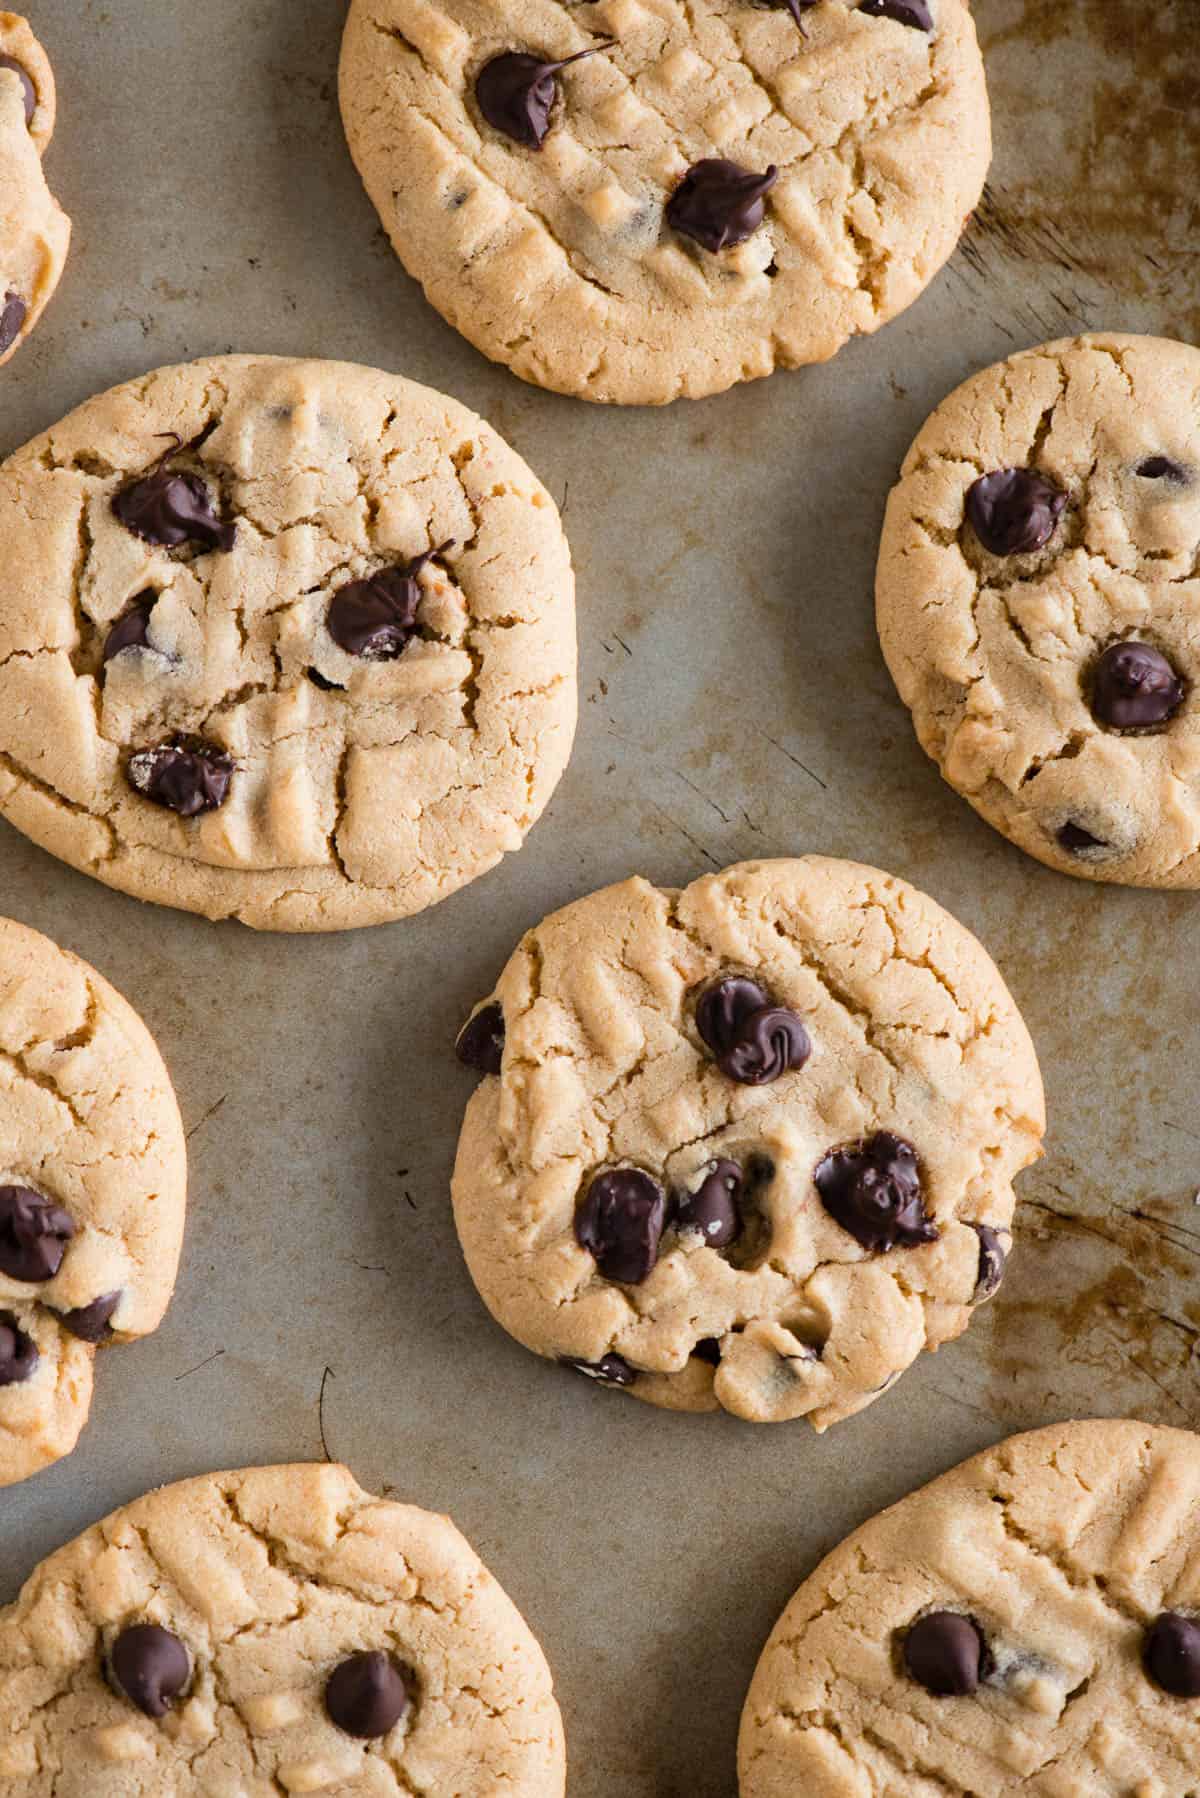 https://selfproclaimedfoodie.com/wp-content/uploads/chocolate-chip-peanut-butter-cookies-1.jpg